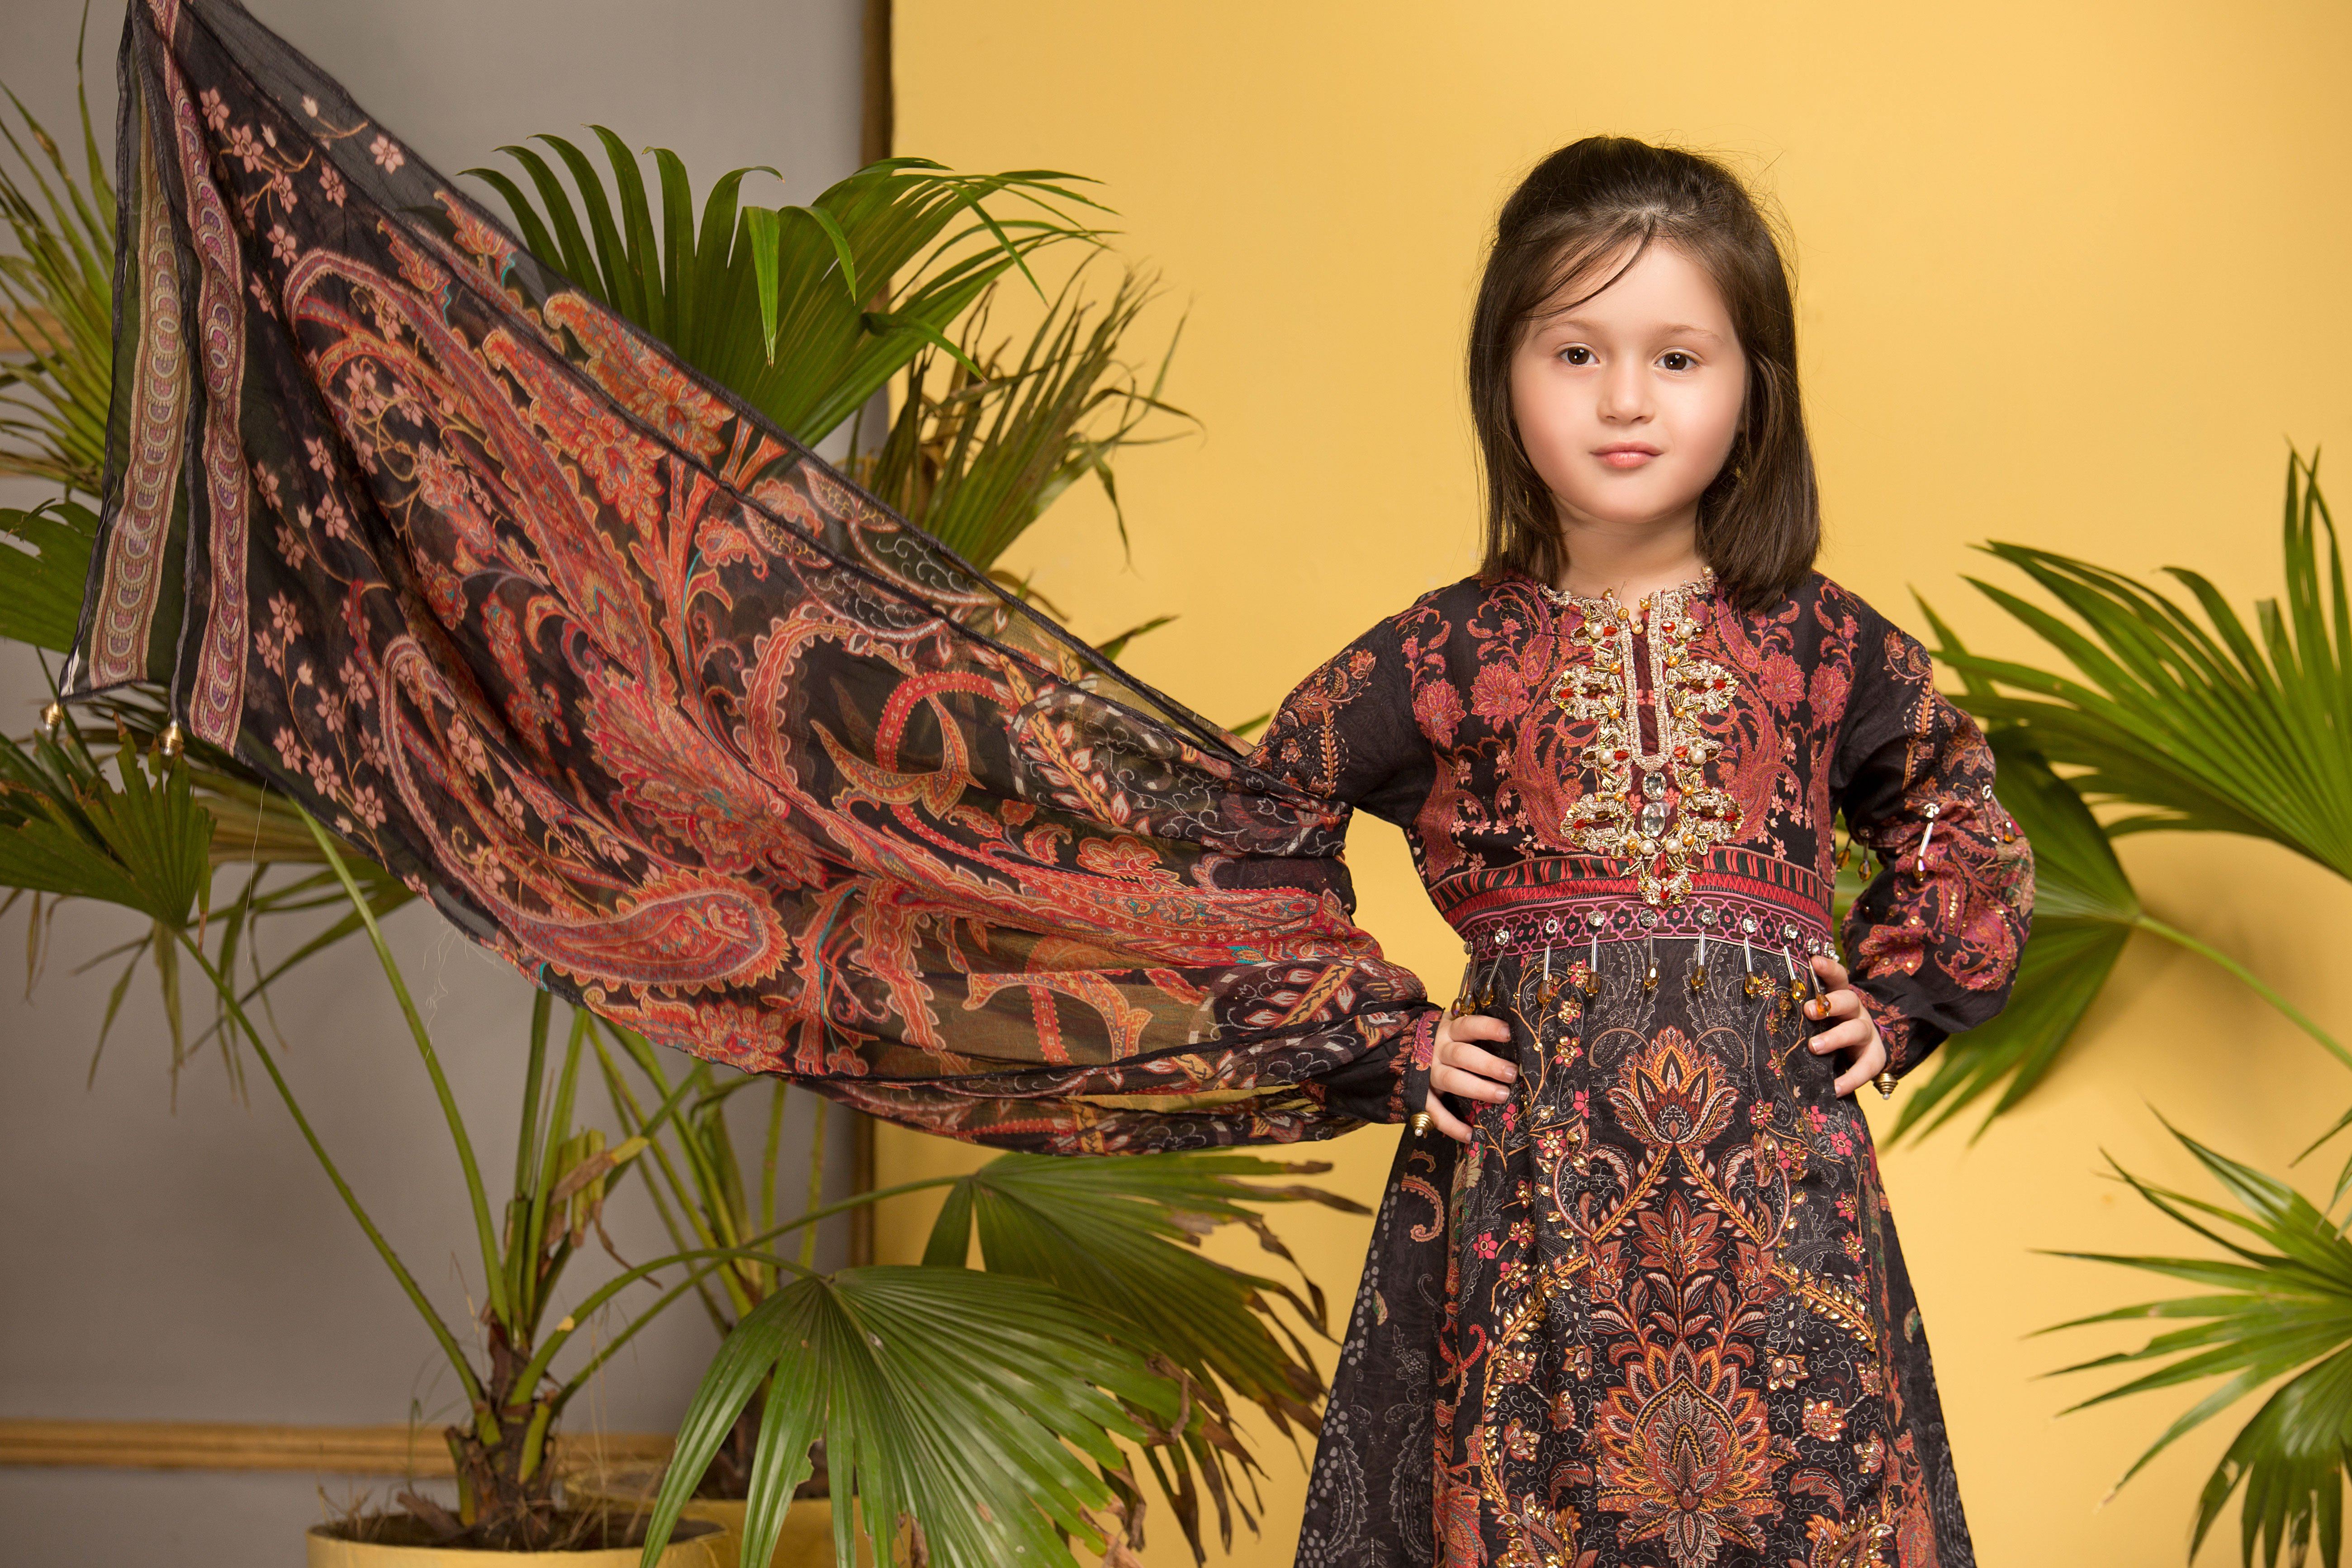 Ivana Kids Digital Print Sindhi Style Maxi Dress Eid Outfit with Embroidered Trousers S2056K - Desi Posh